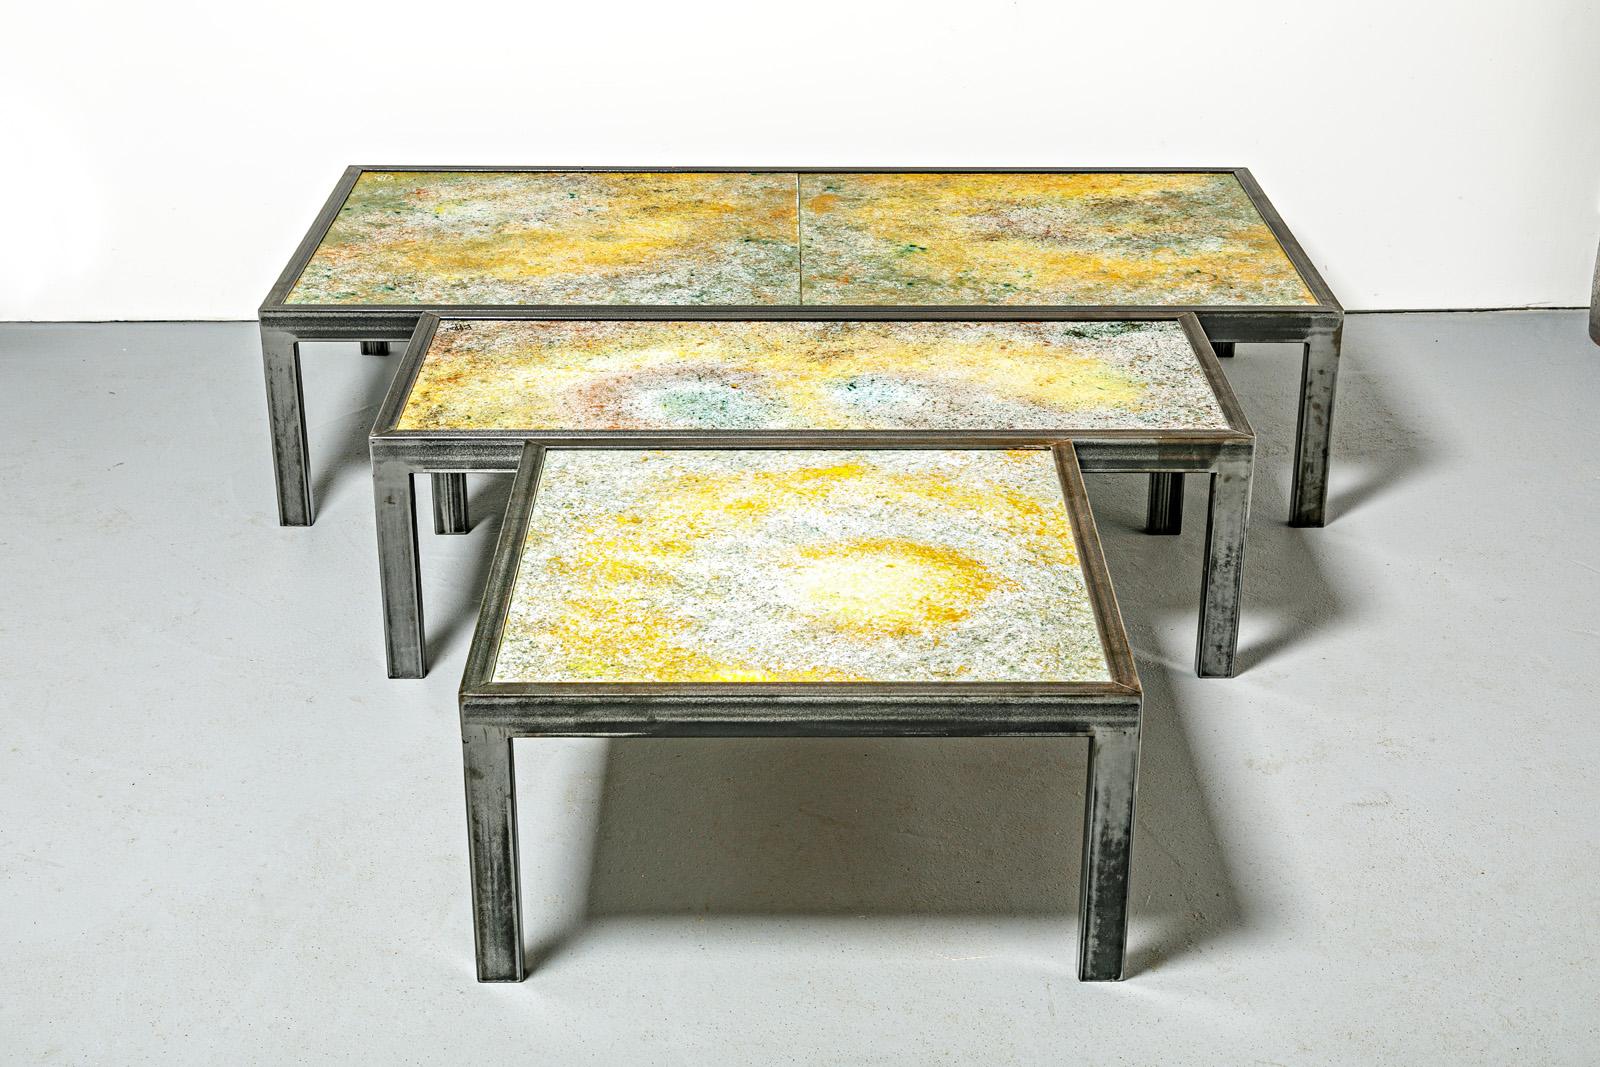 Set of 3 Large 20th Century Colored Ceramic Low Tables by Bernard Buffat 1970 For Sale 11